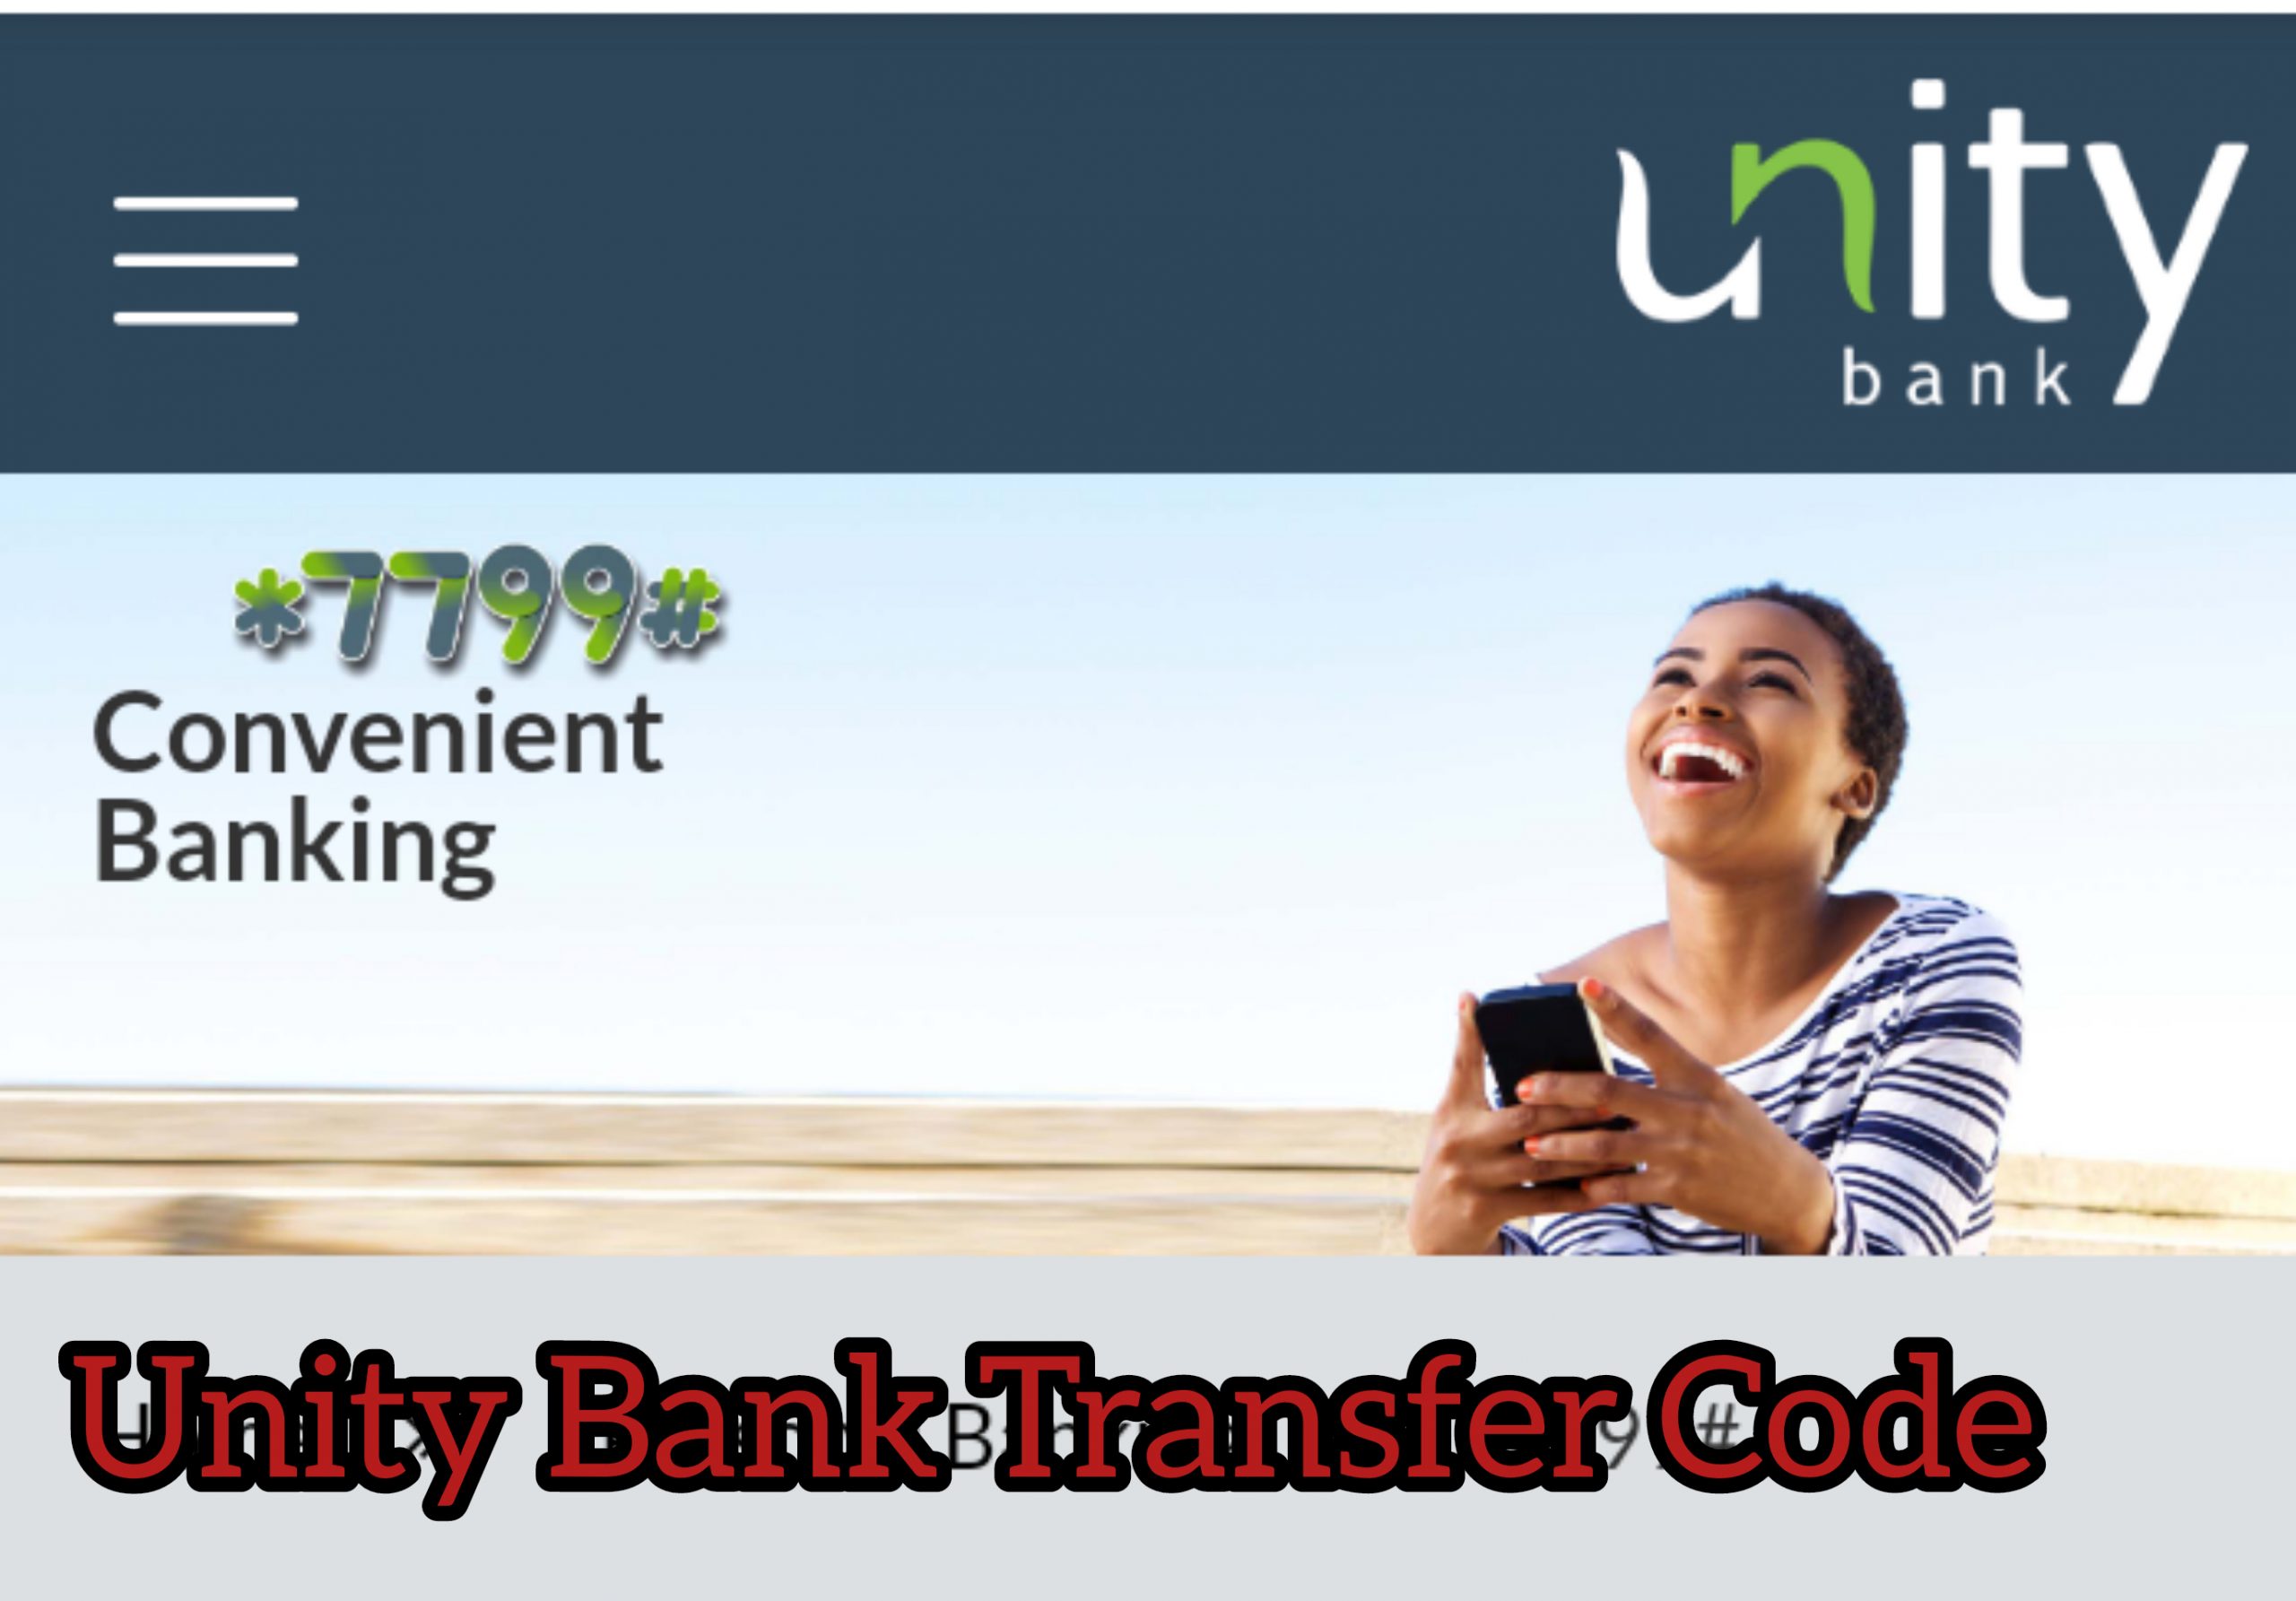 Unity Bank Transfer Code *7799# - Unity Bank USSD Code For Transfer